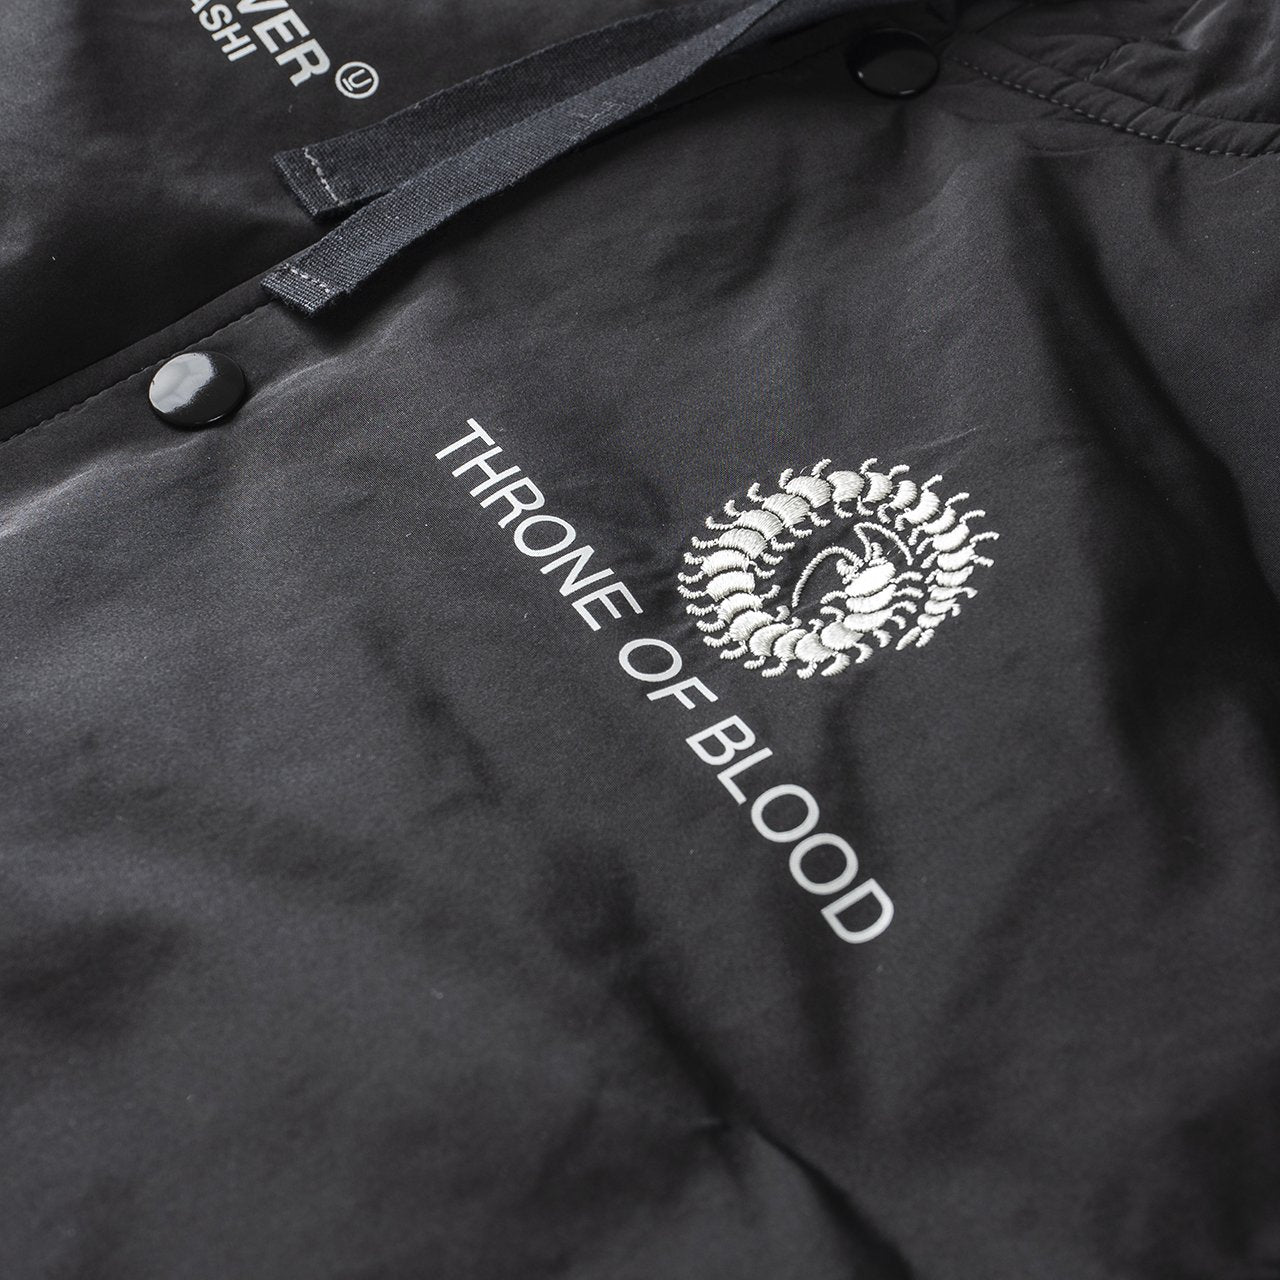 undercover undercover 'throne of blood' hooded jacket (black)